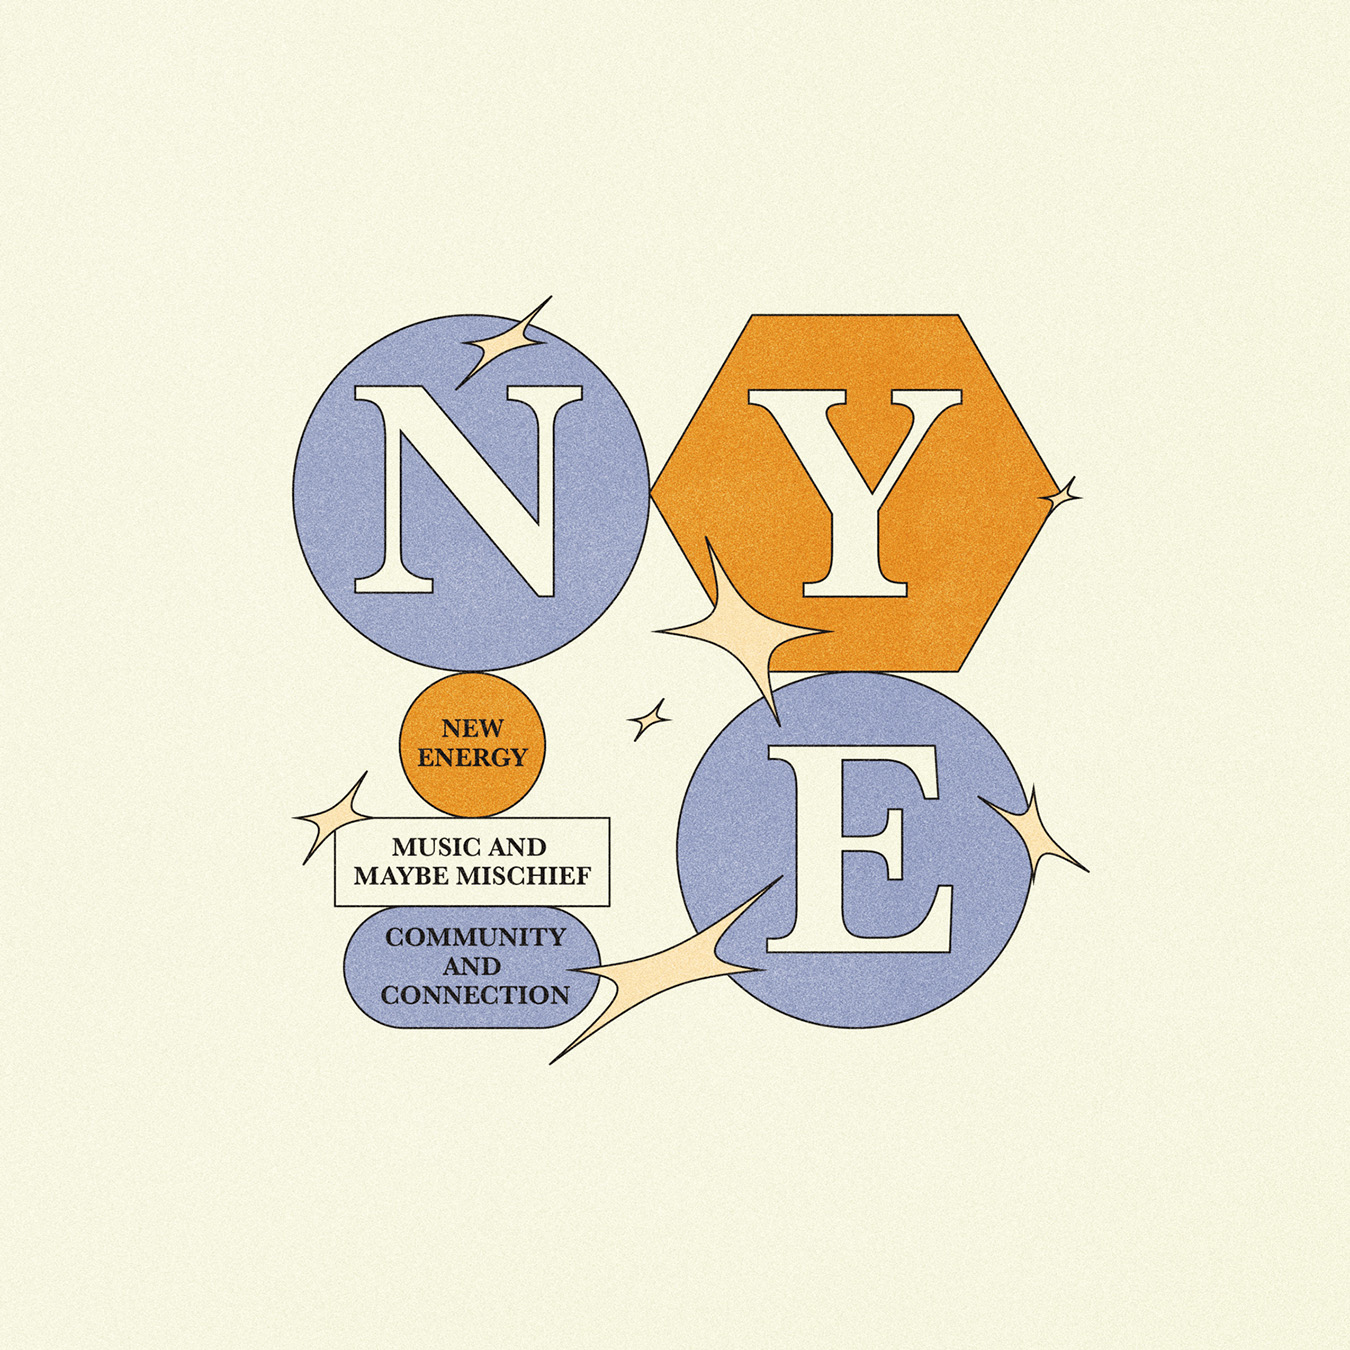 The poster exhibits "N Y E" along with additional small text for New Year's Eve.